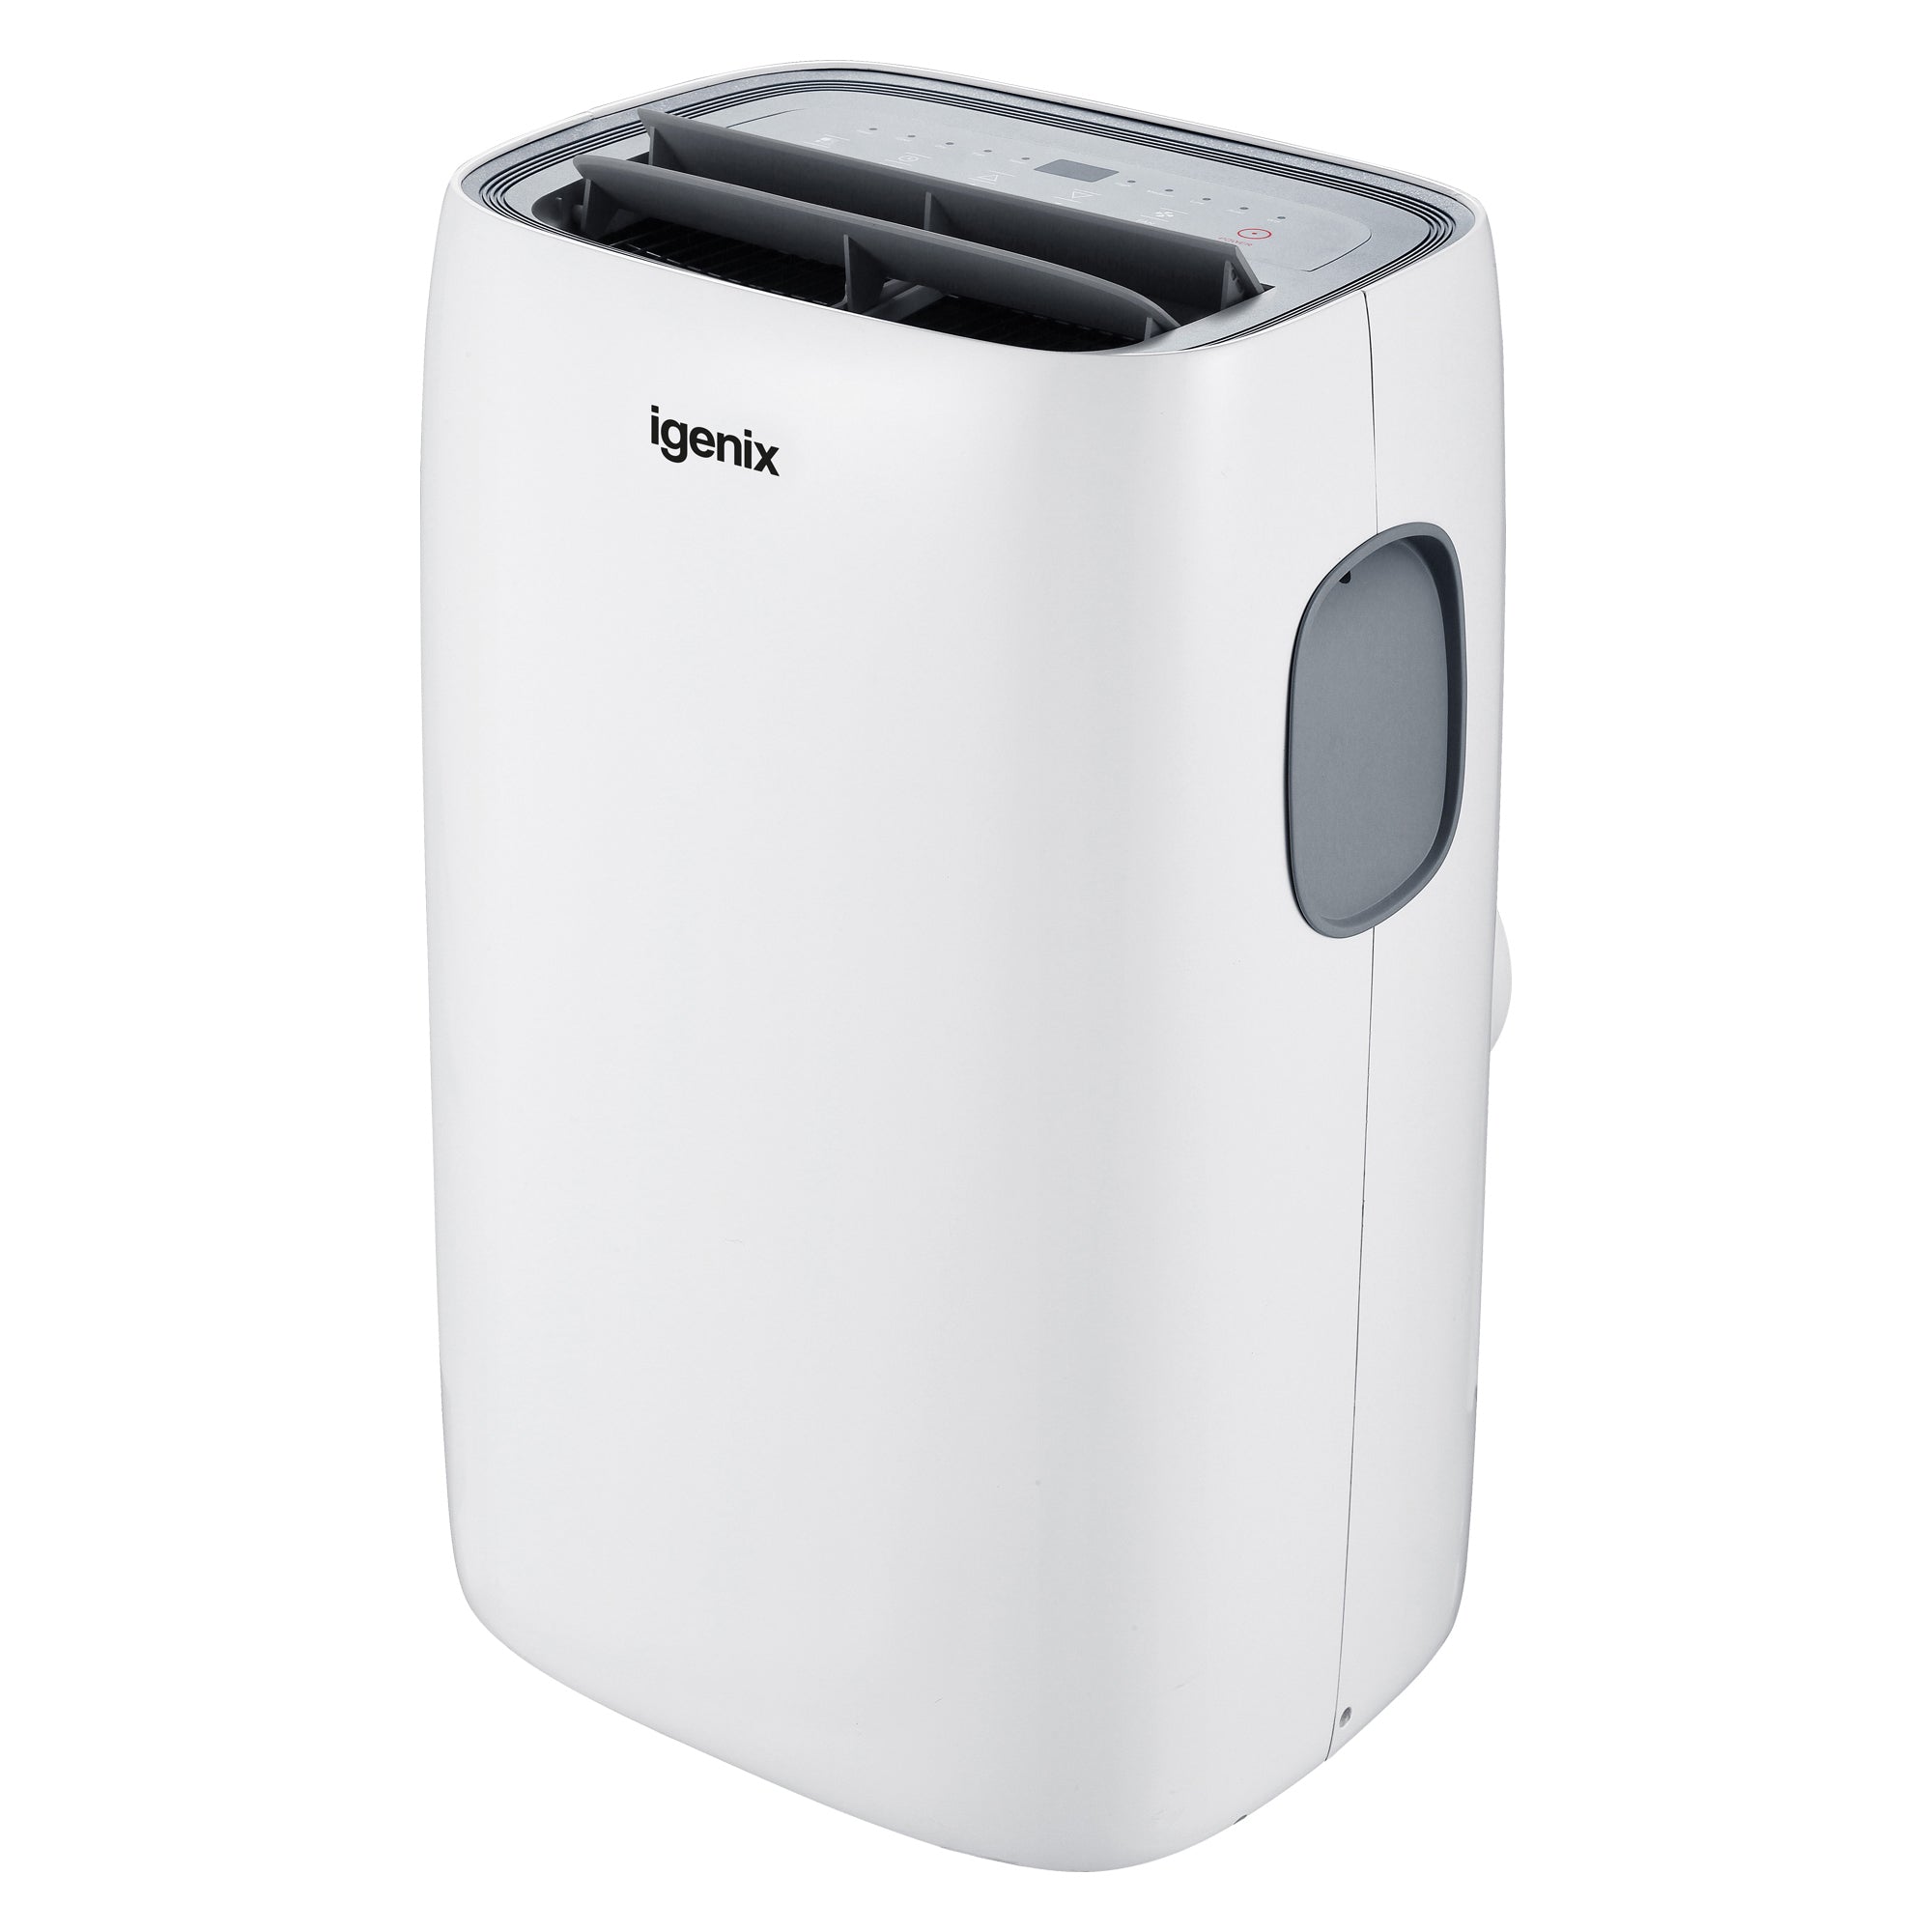 4-in-1 Portable Air Conditioner, Cooling, Heating & Dehumidifier, 9000 BTU